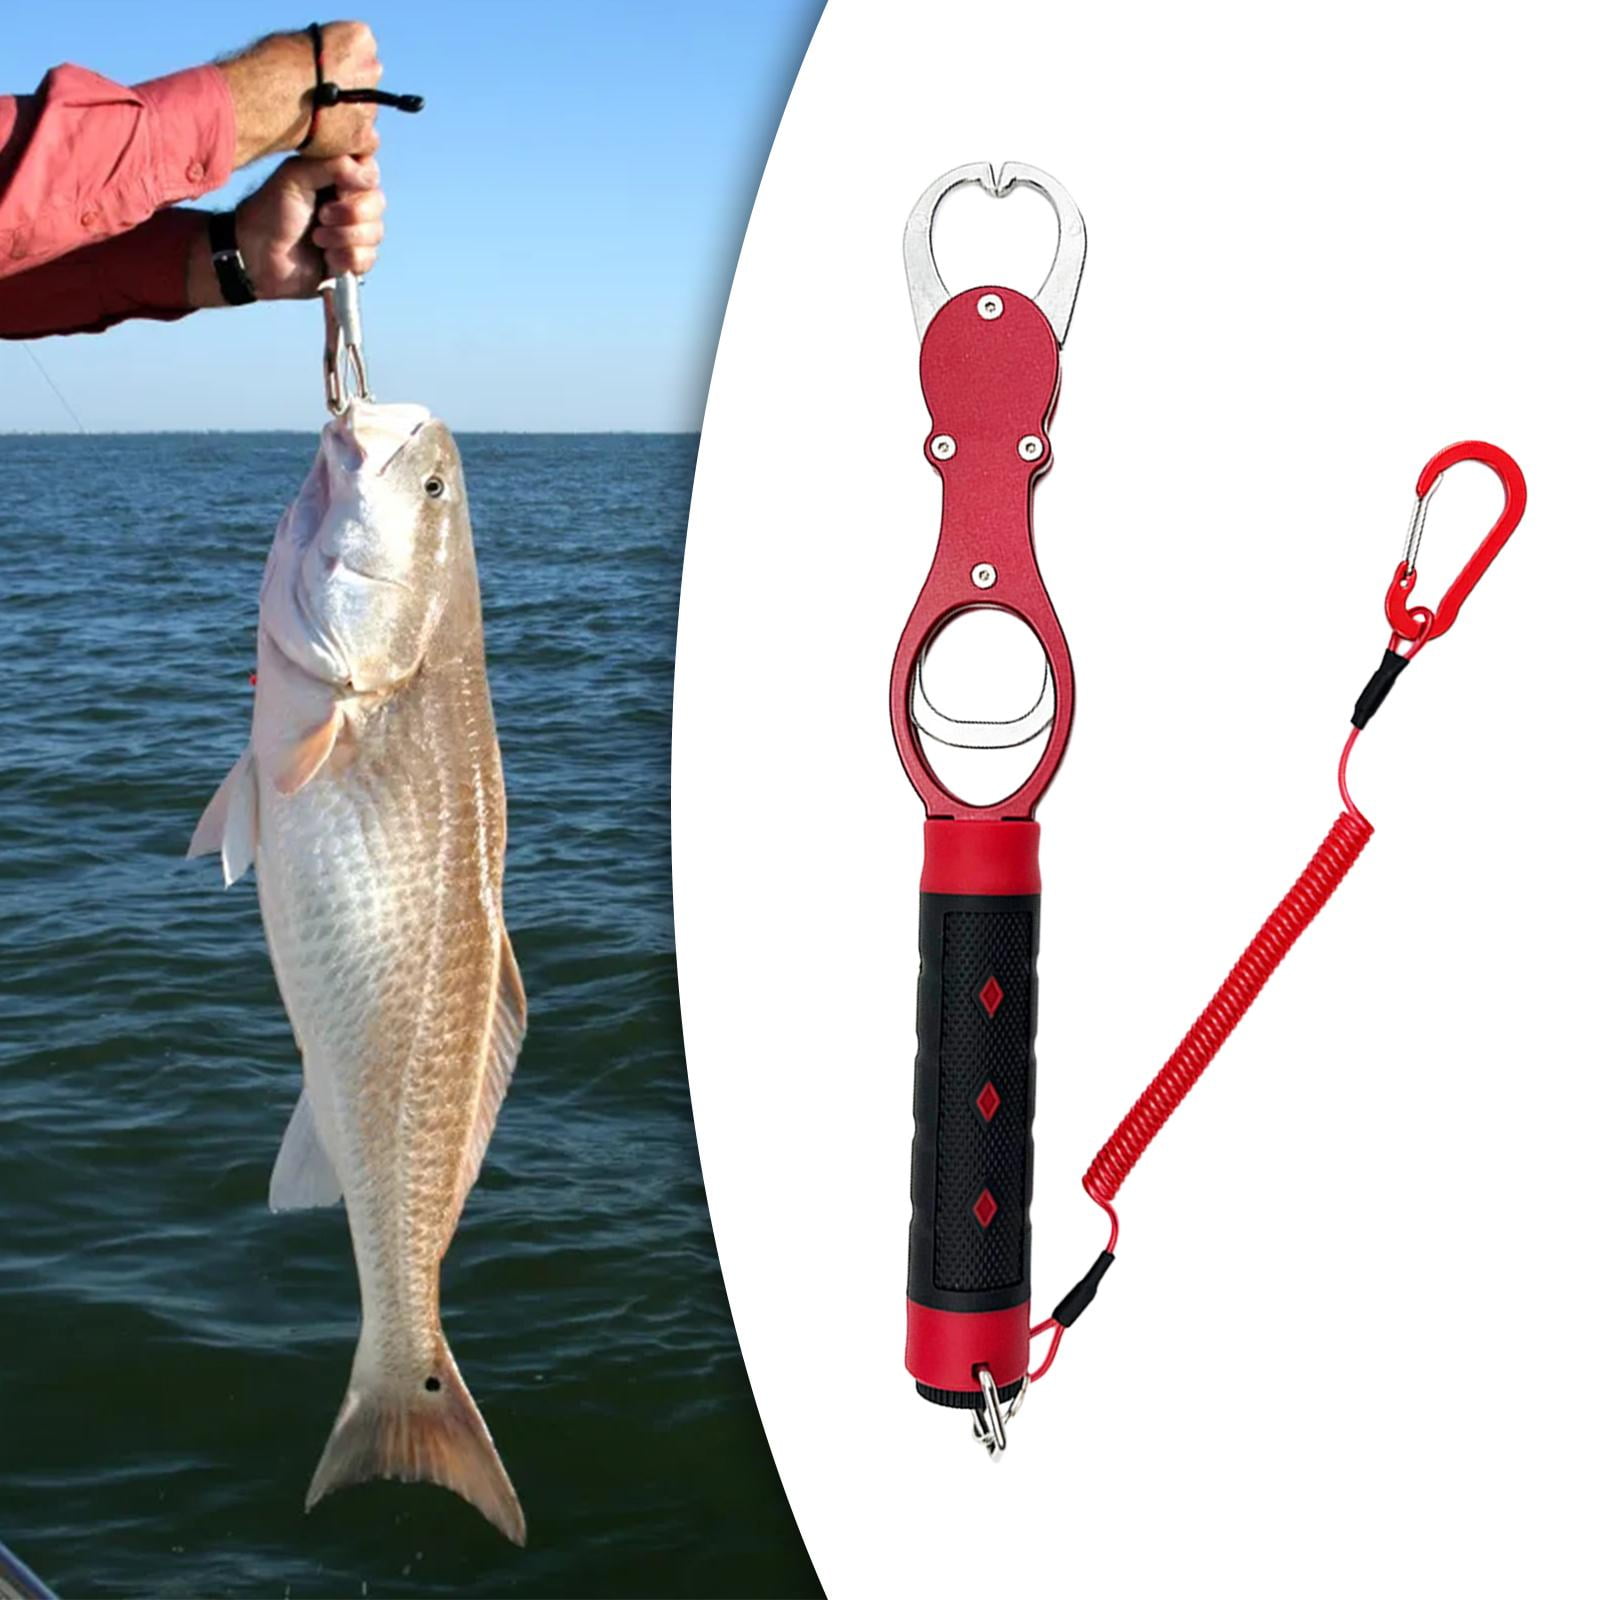 Rdeghly Fishing Gripper Gear Tool ABS Grip Tackle Holder Fish Clamp with  Rope, Grip Tackle, Fish Lip Gripper 